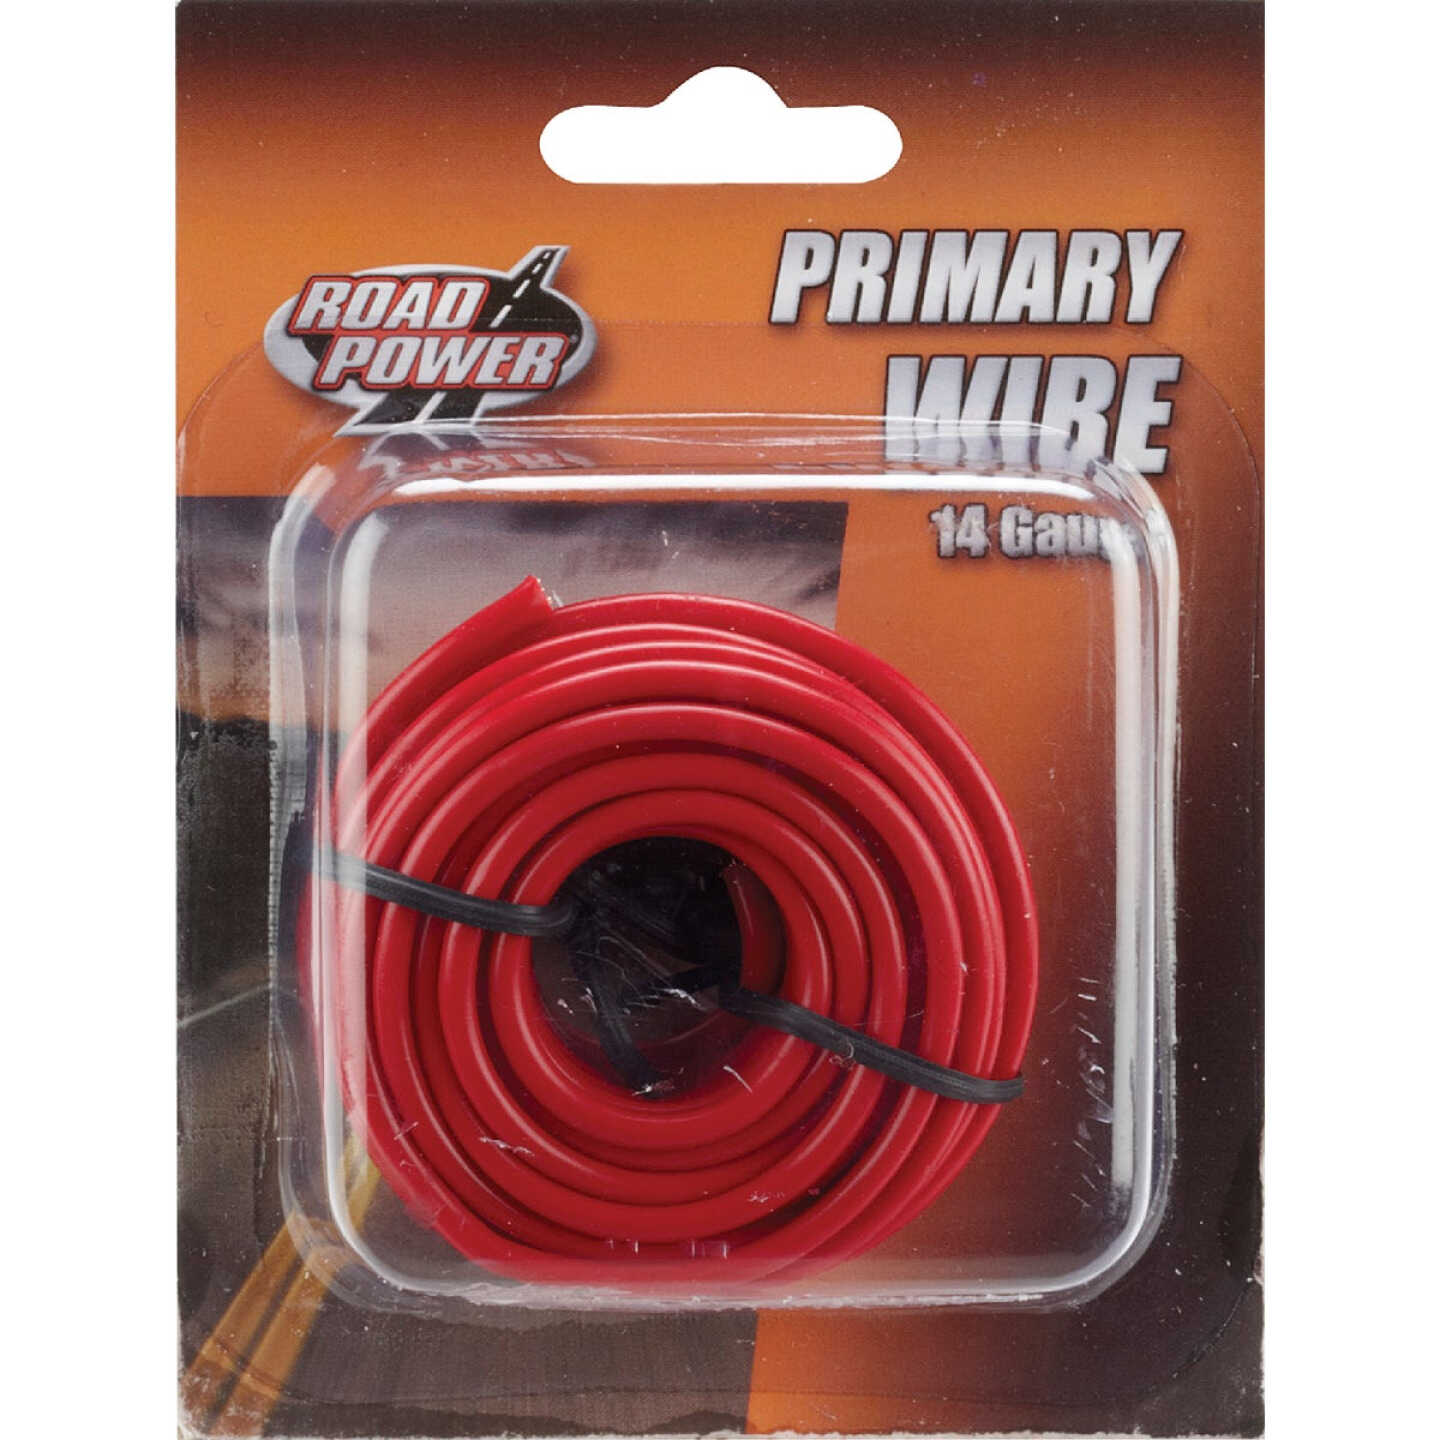 14 Gauge Primary AWG Wire 25' FT Each Red & Black Stranded Copper